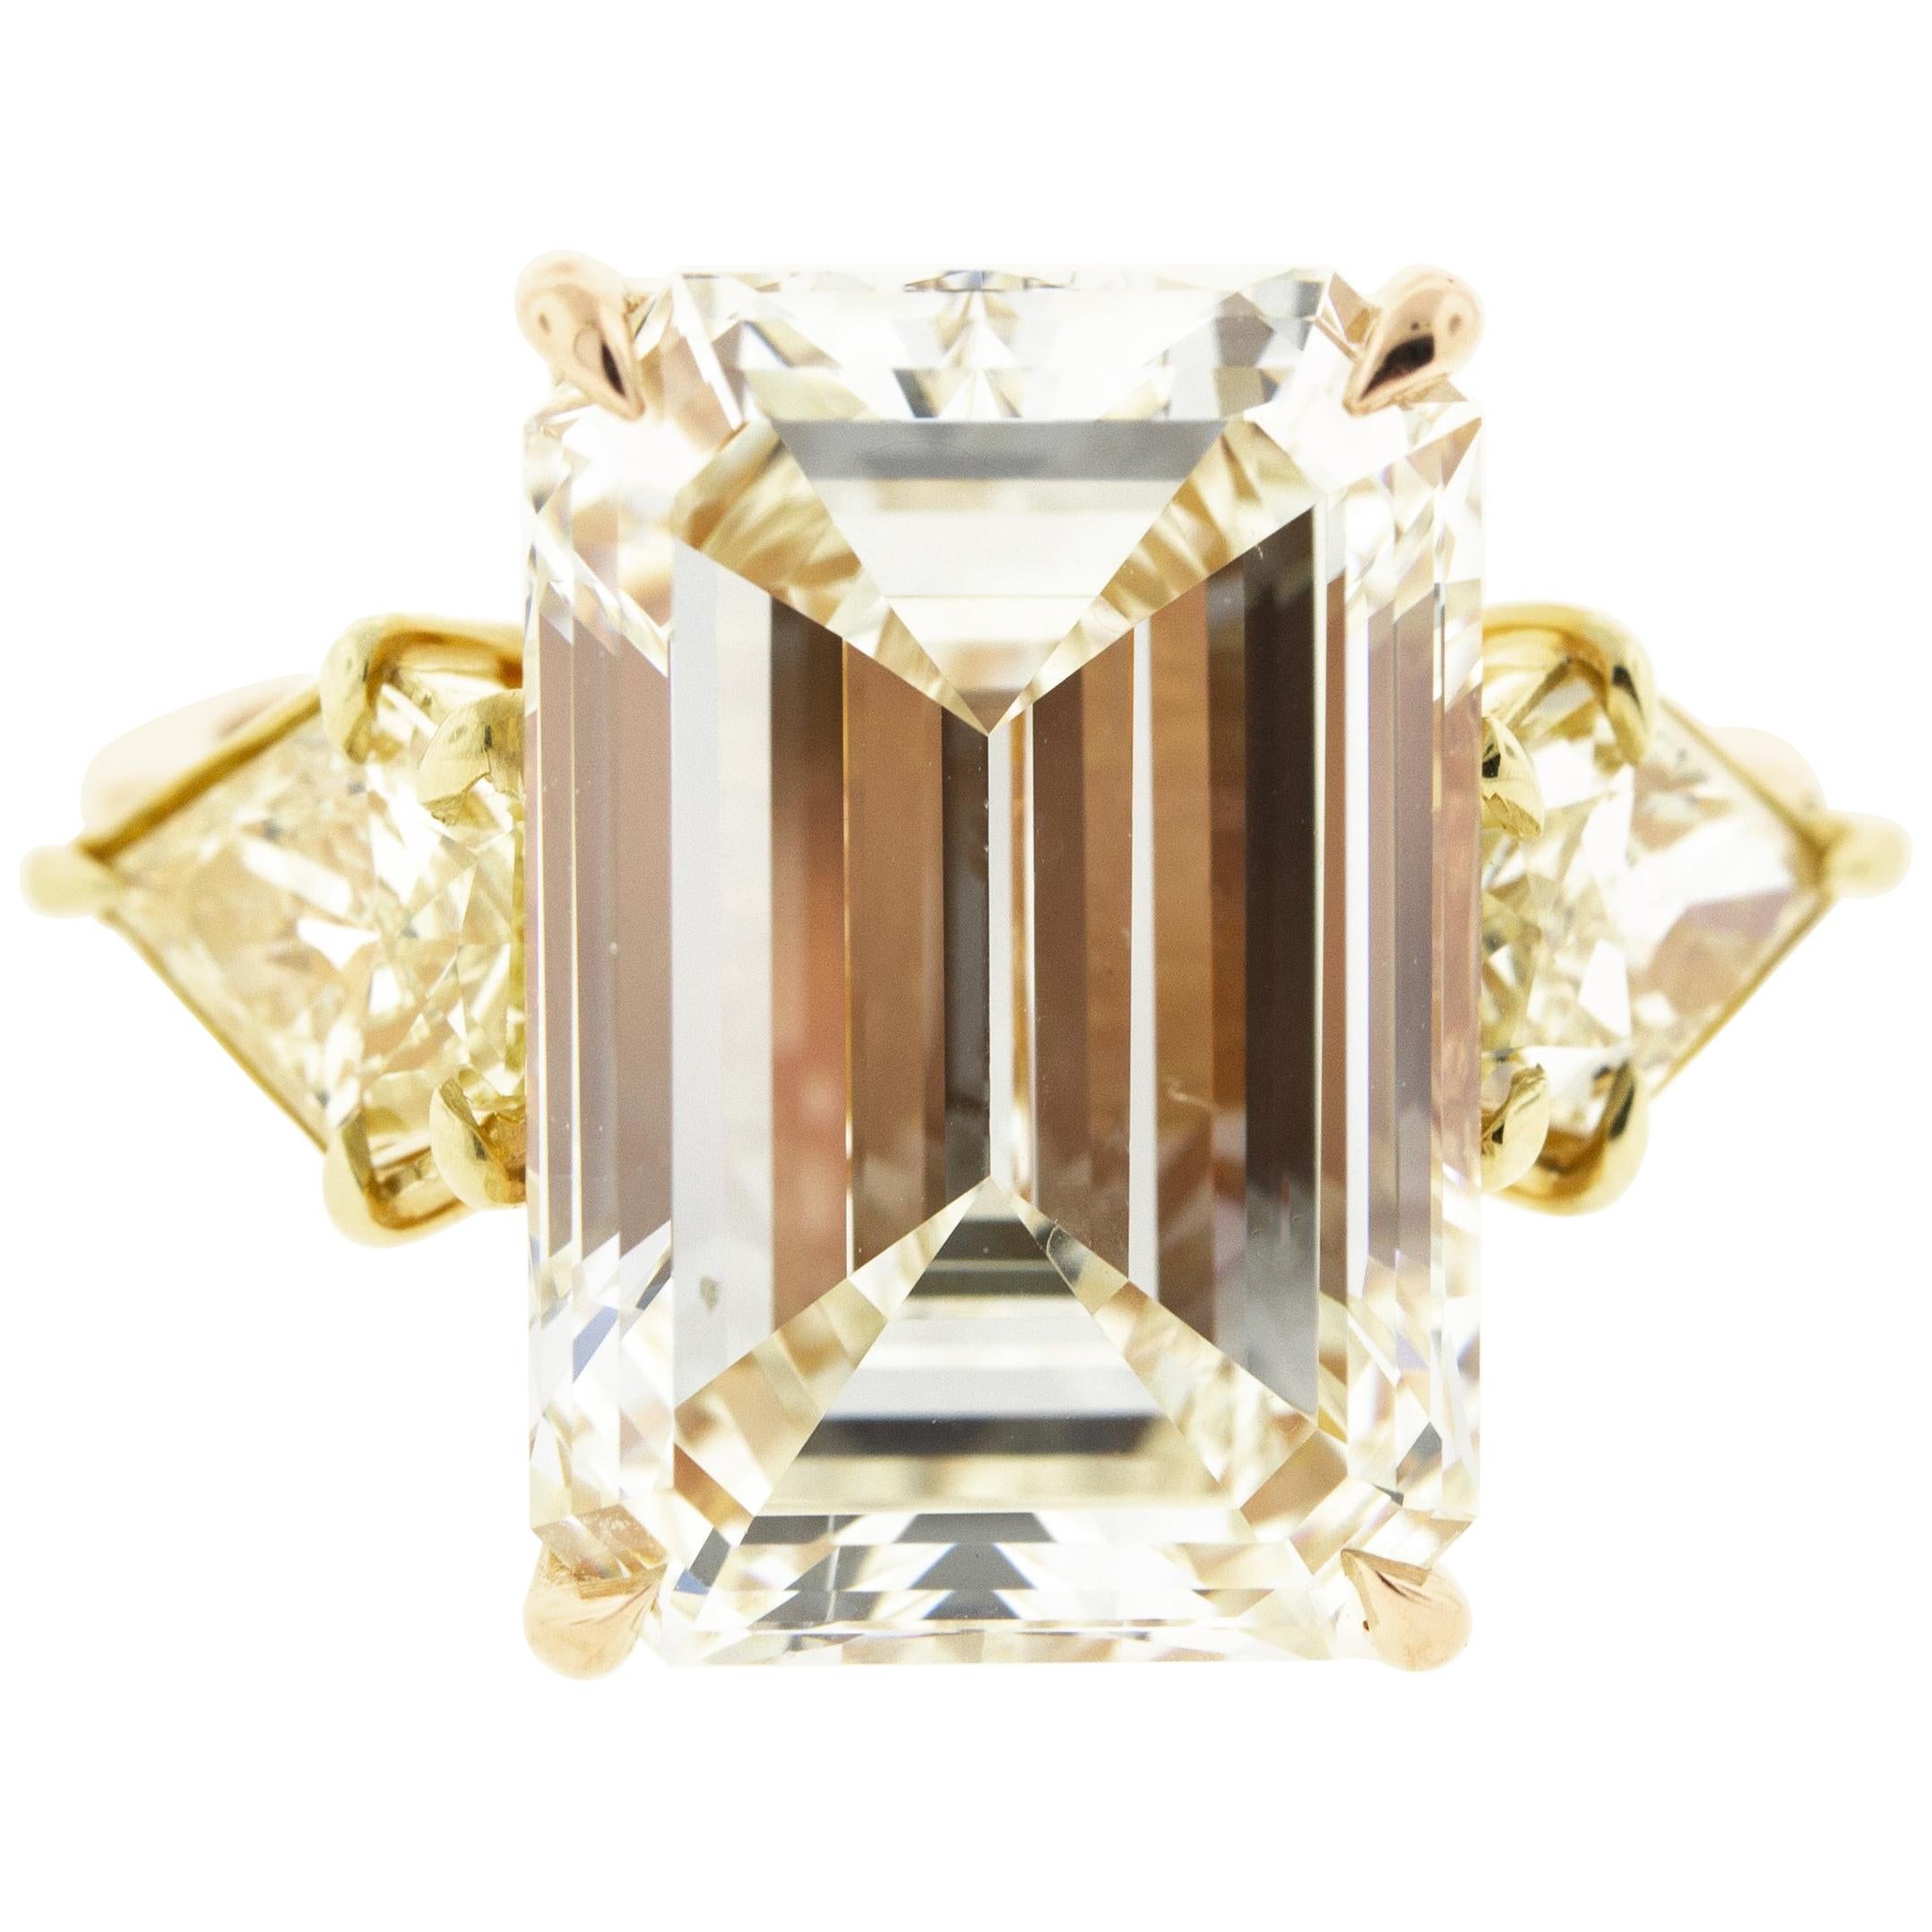 10 Carat Vintage Emerald Cut Diamond Ring with Side Trillions For Sale